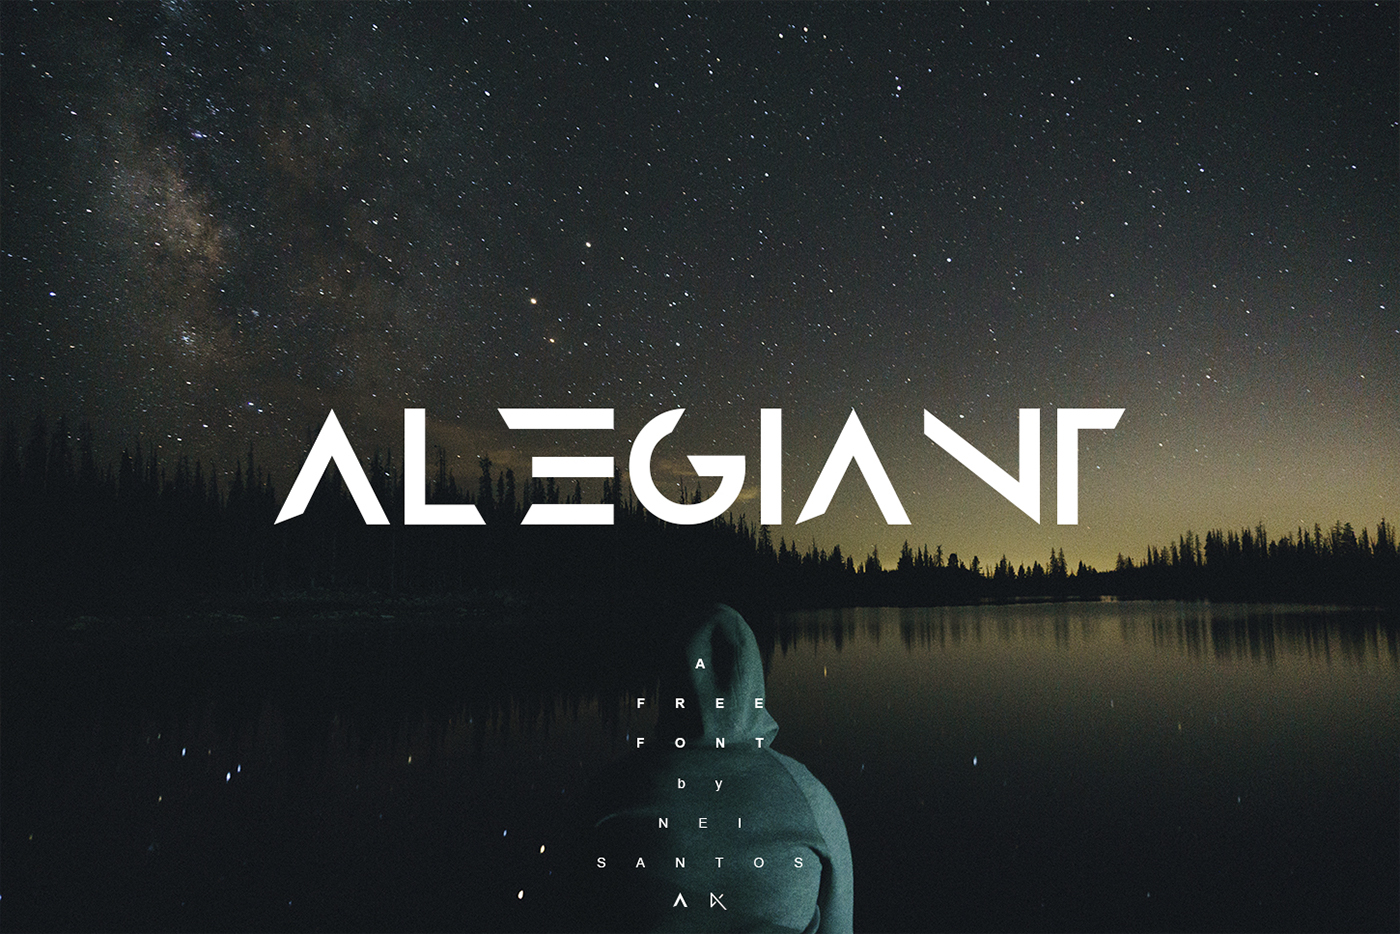 Allegiant Free font free download graphism design modulable typography   font Typeface free typeface